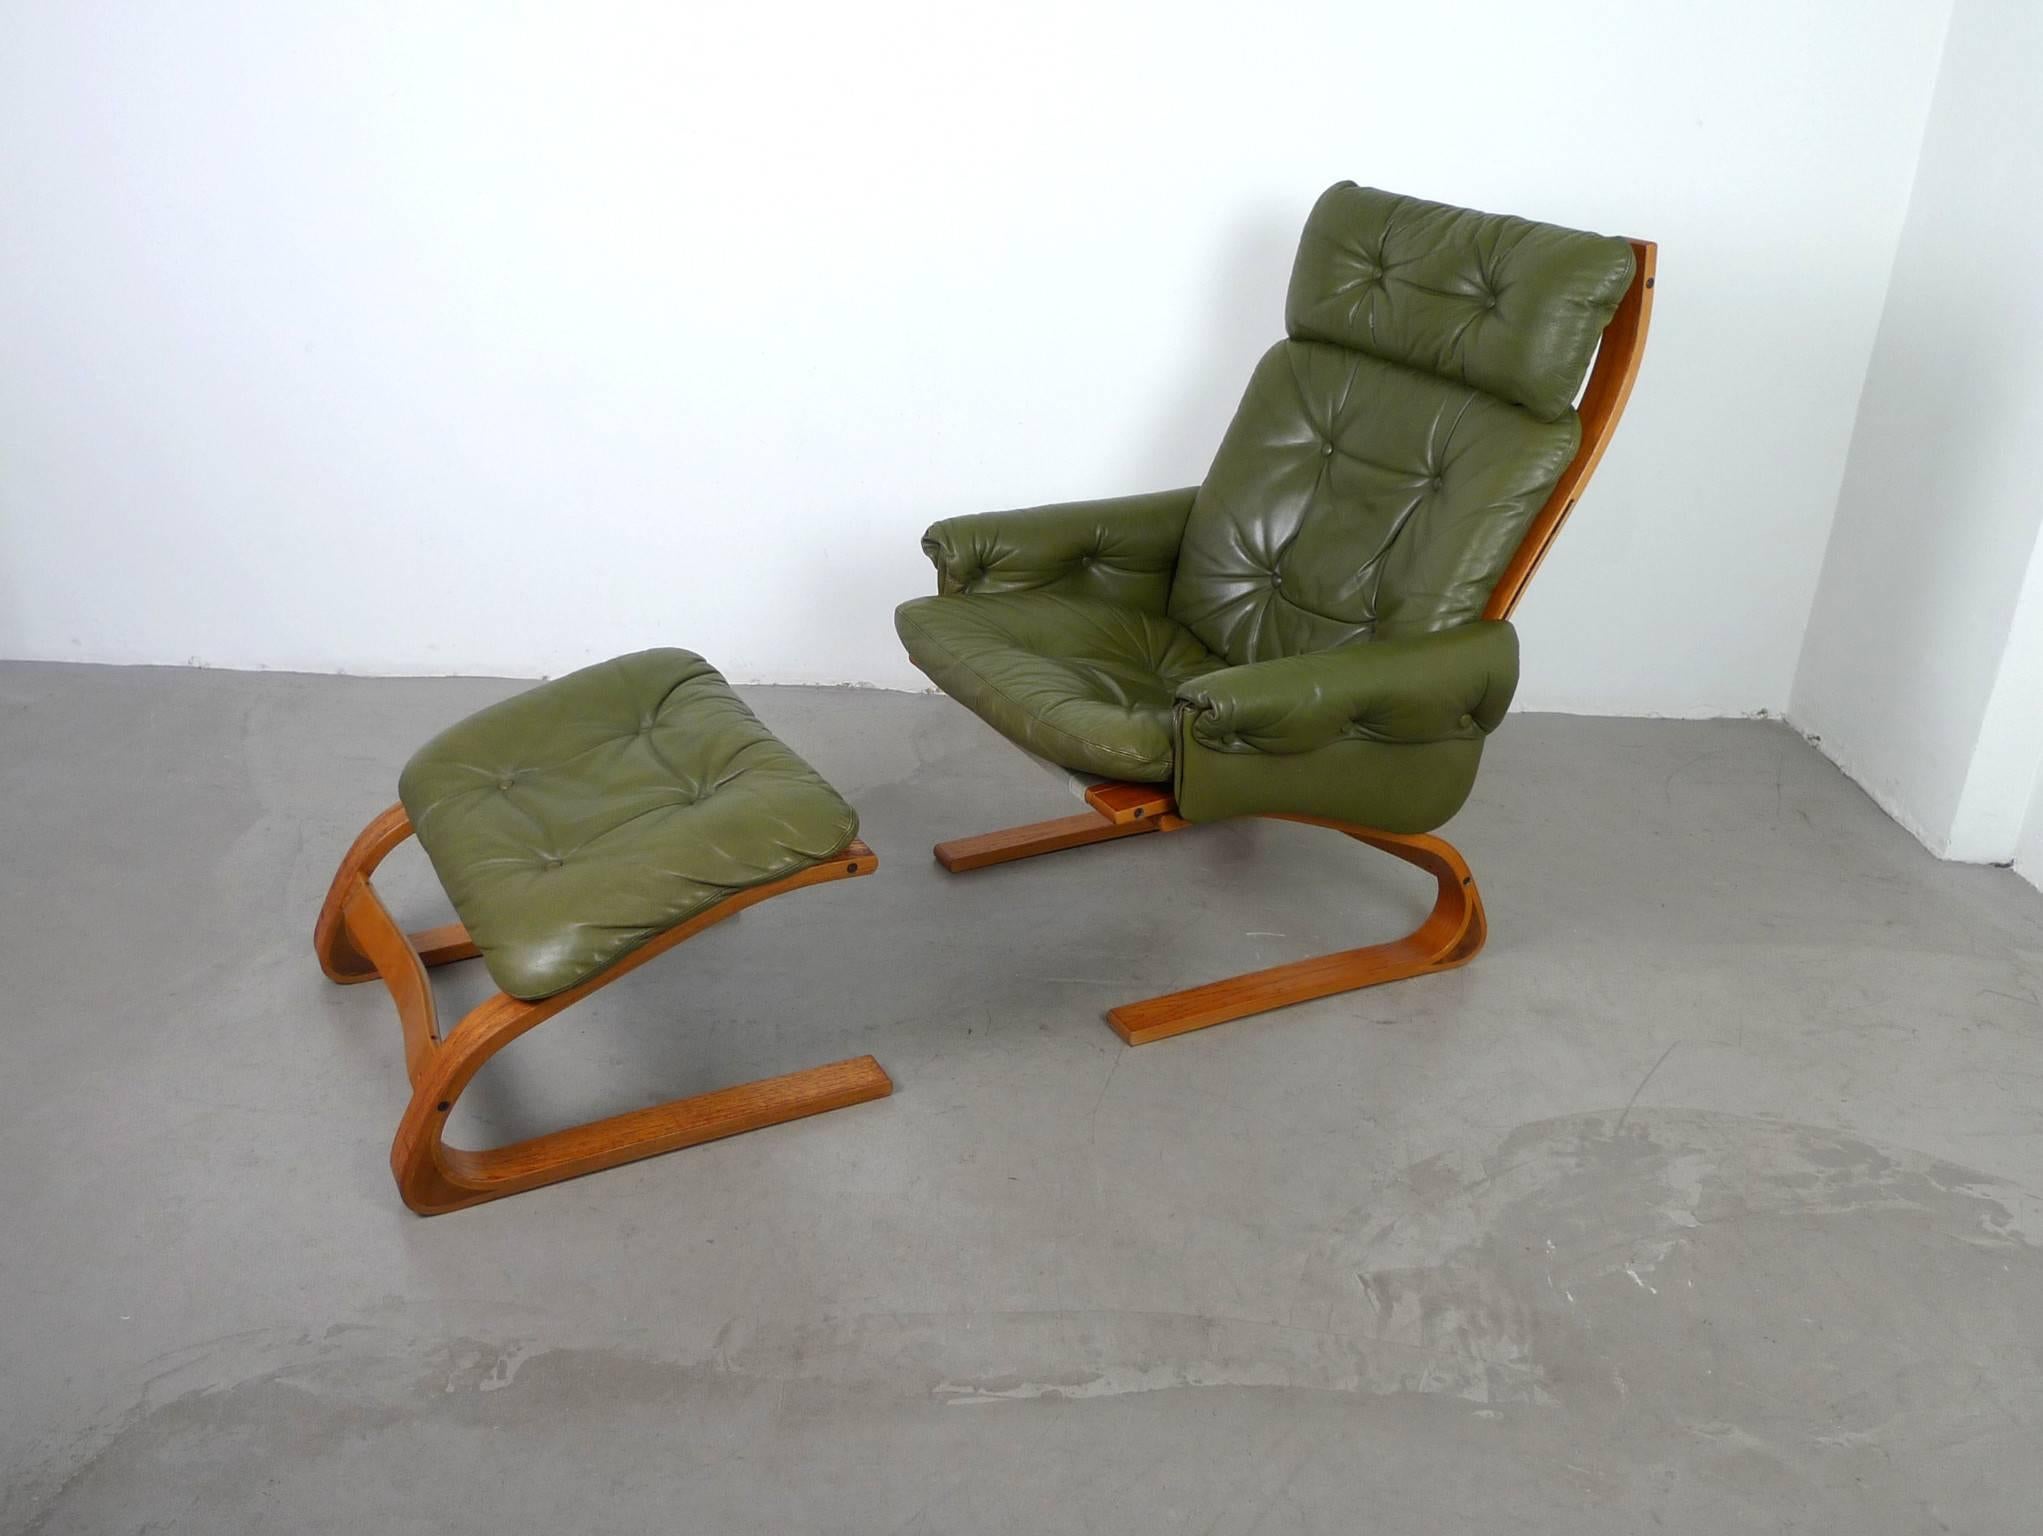 1970s Highback lounge chair with armrests and matching ottoman designed by Elsa and Nordahl Solheim for Rykken in Norway.
This cantilever chair 